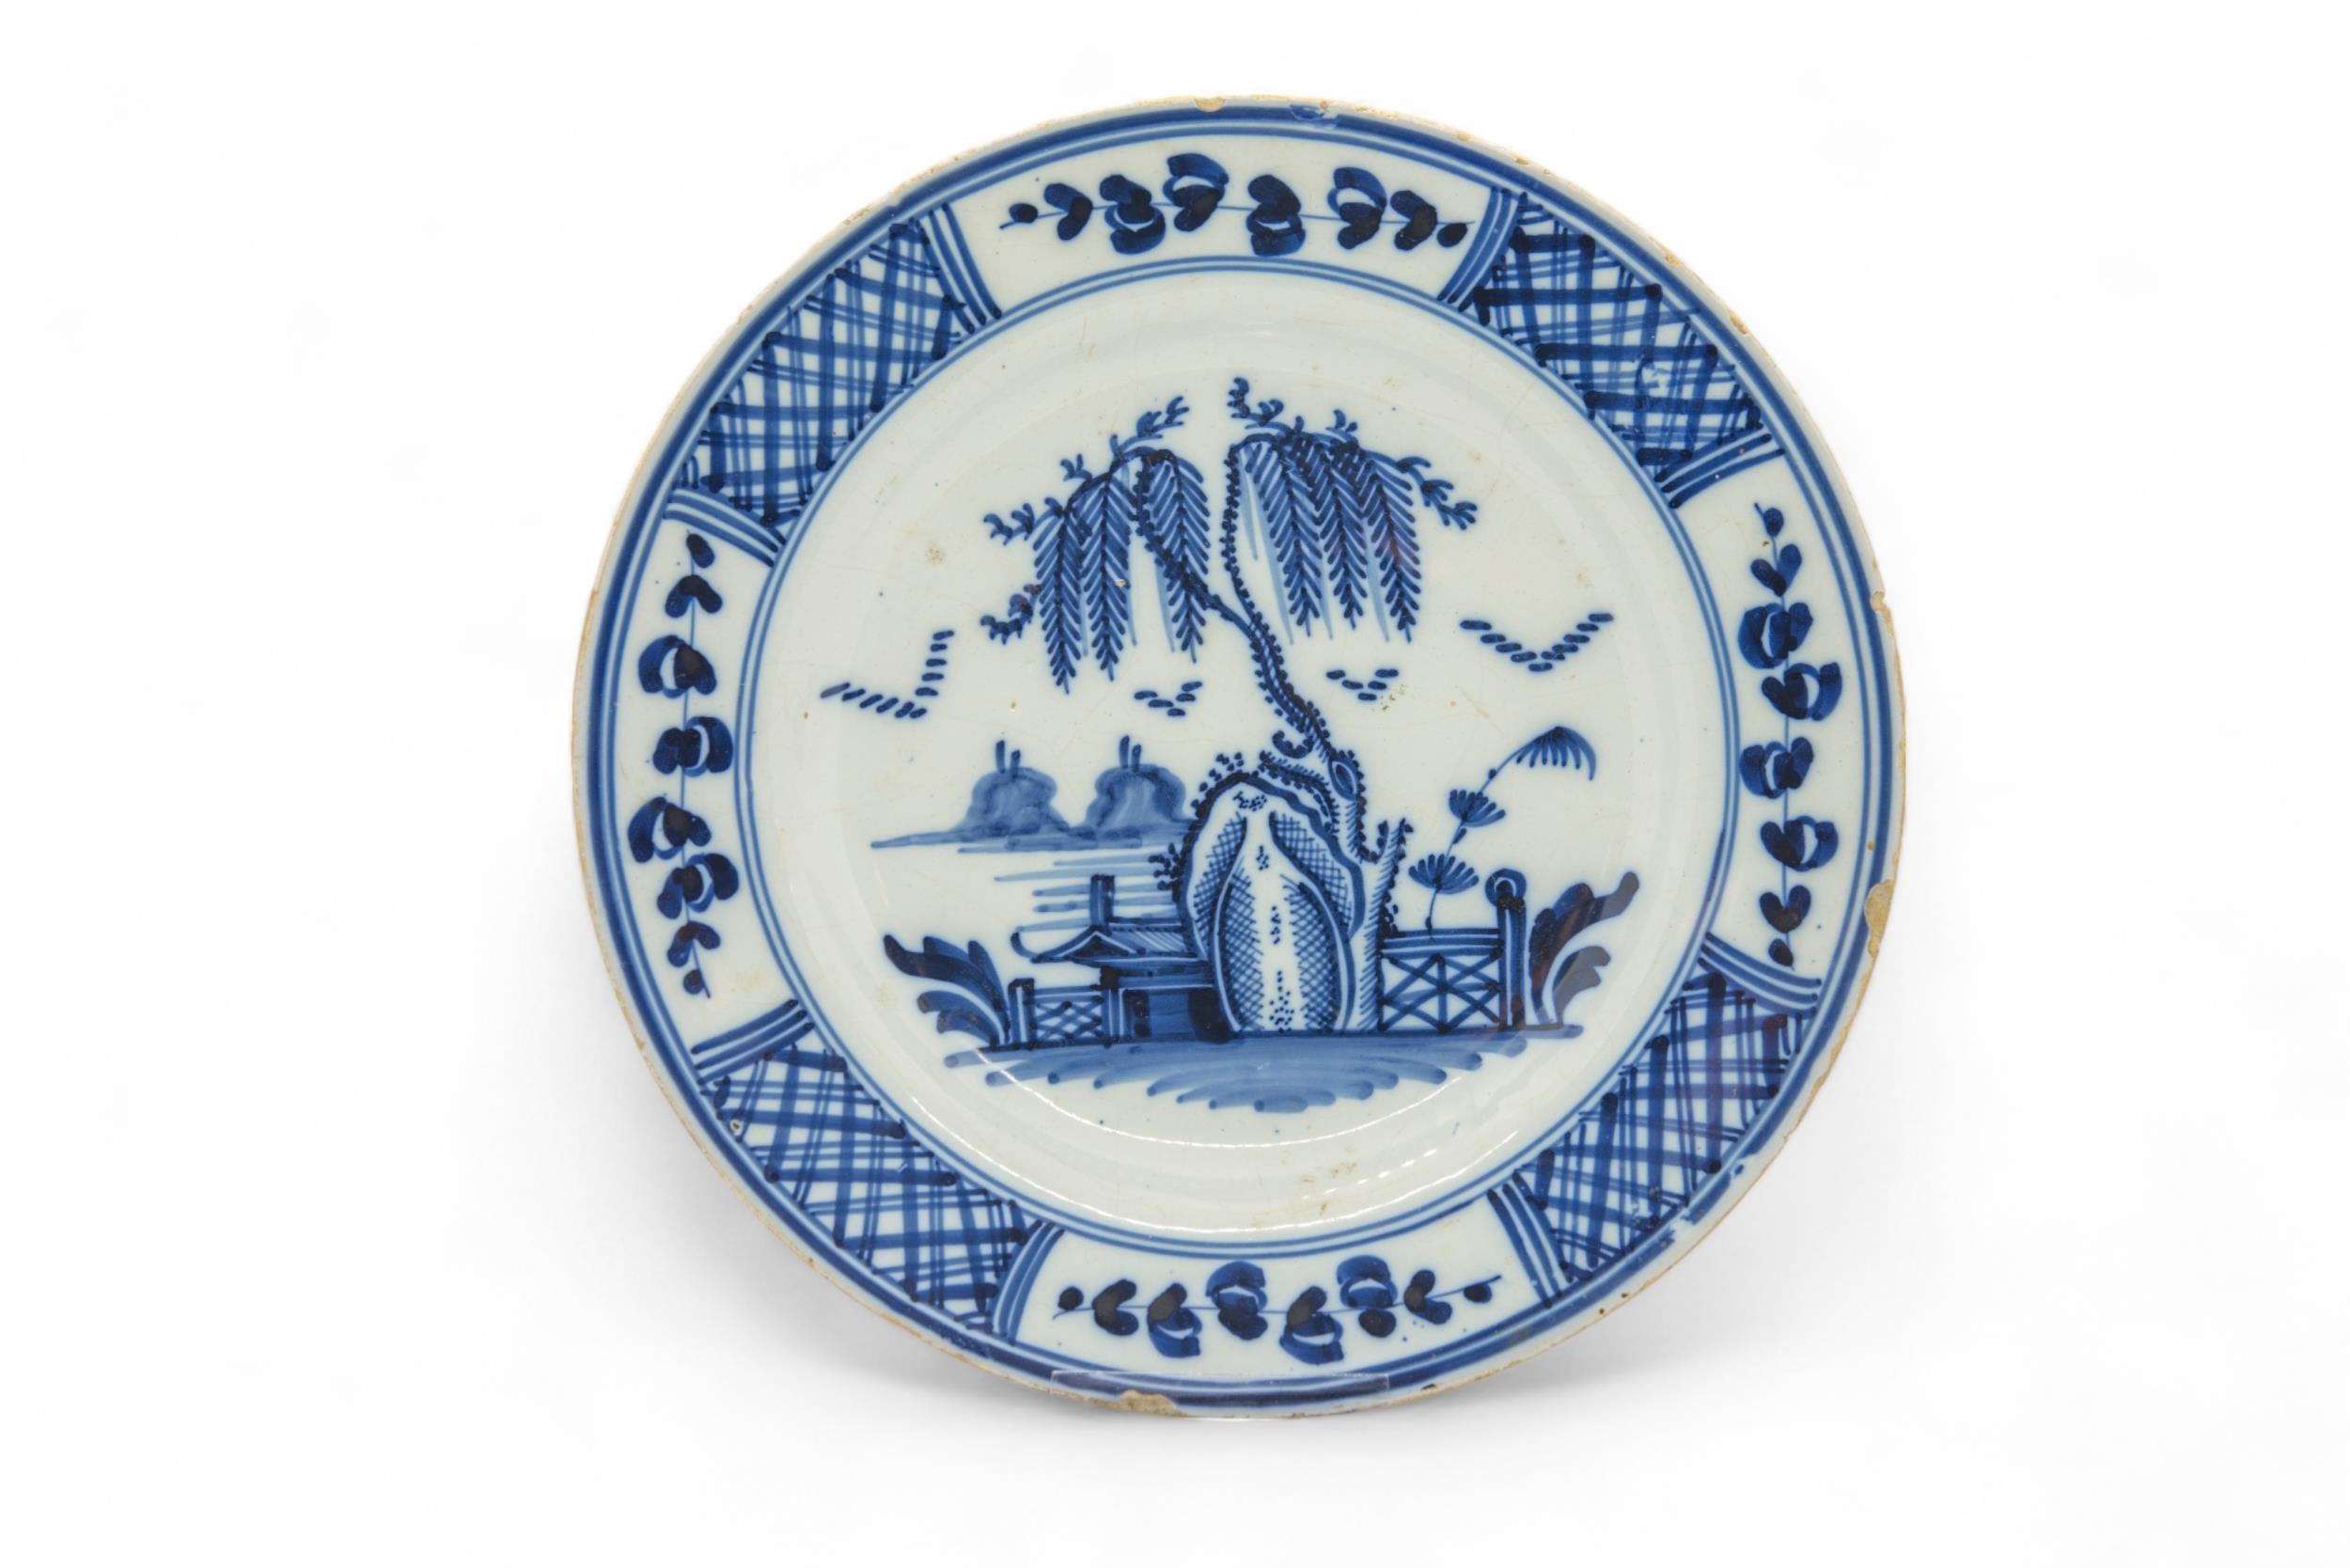 SIX DELFT PLATES 18th Century, one inscribed "T.M.LANE", 23cms wide - Image 4 of 7